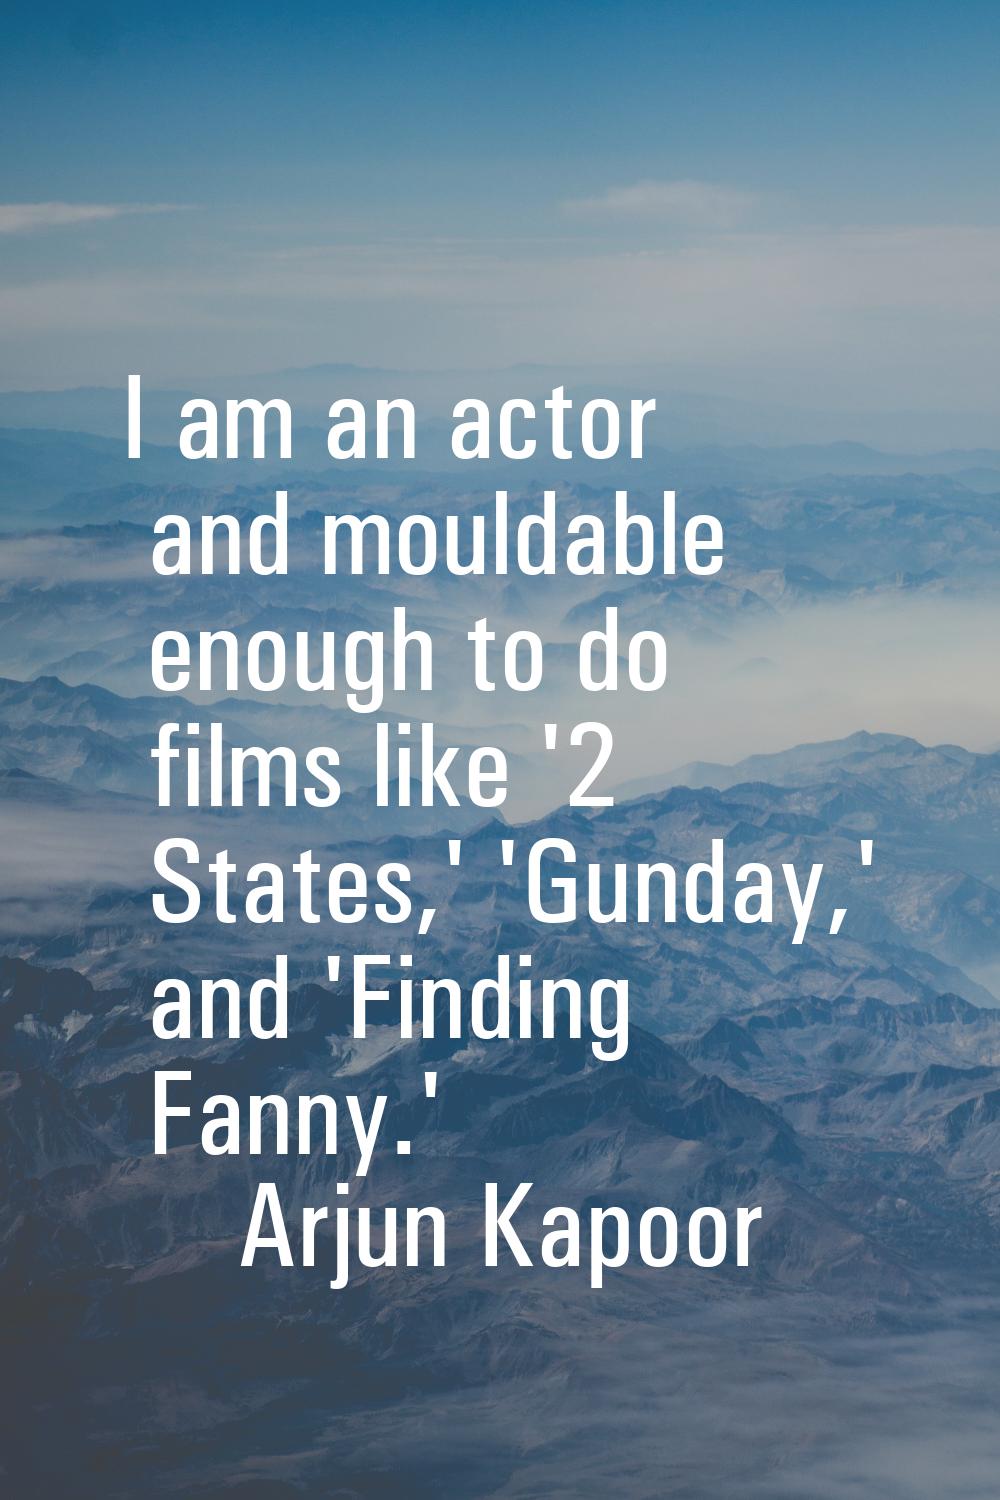 I am an actor and mouldable enough to do films like '2 States,' 'Gunday,' and 'Finding Fanny.'